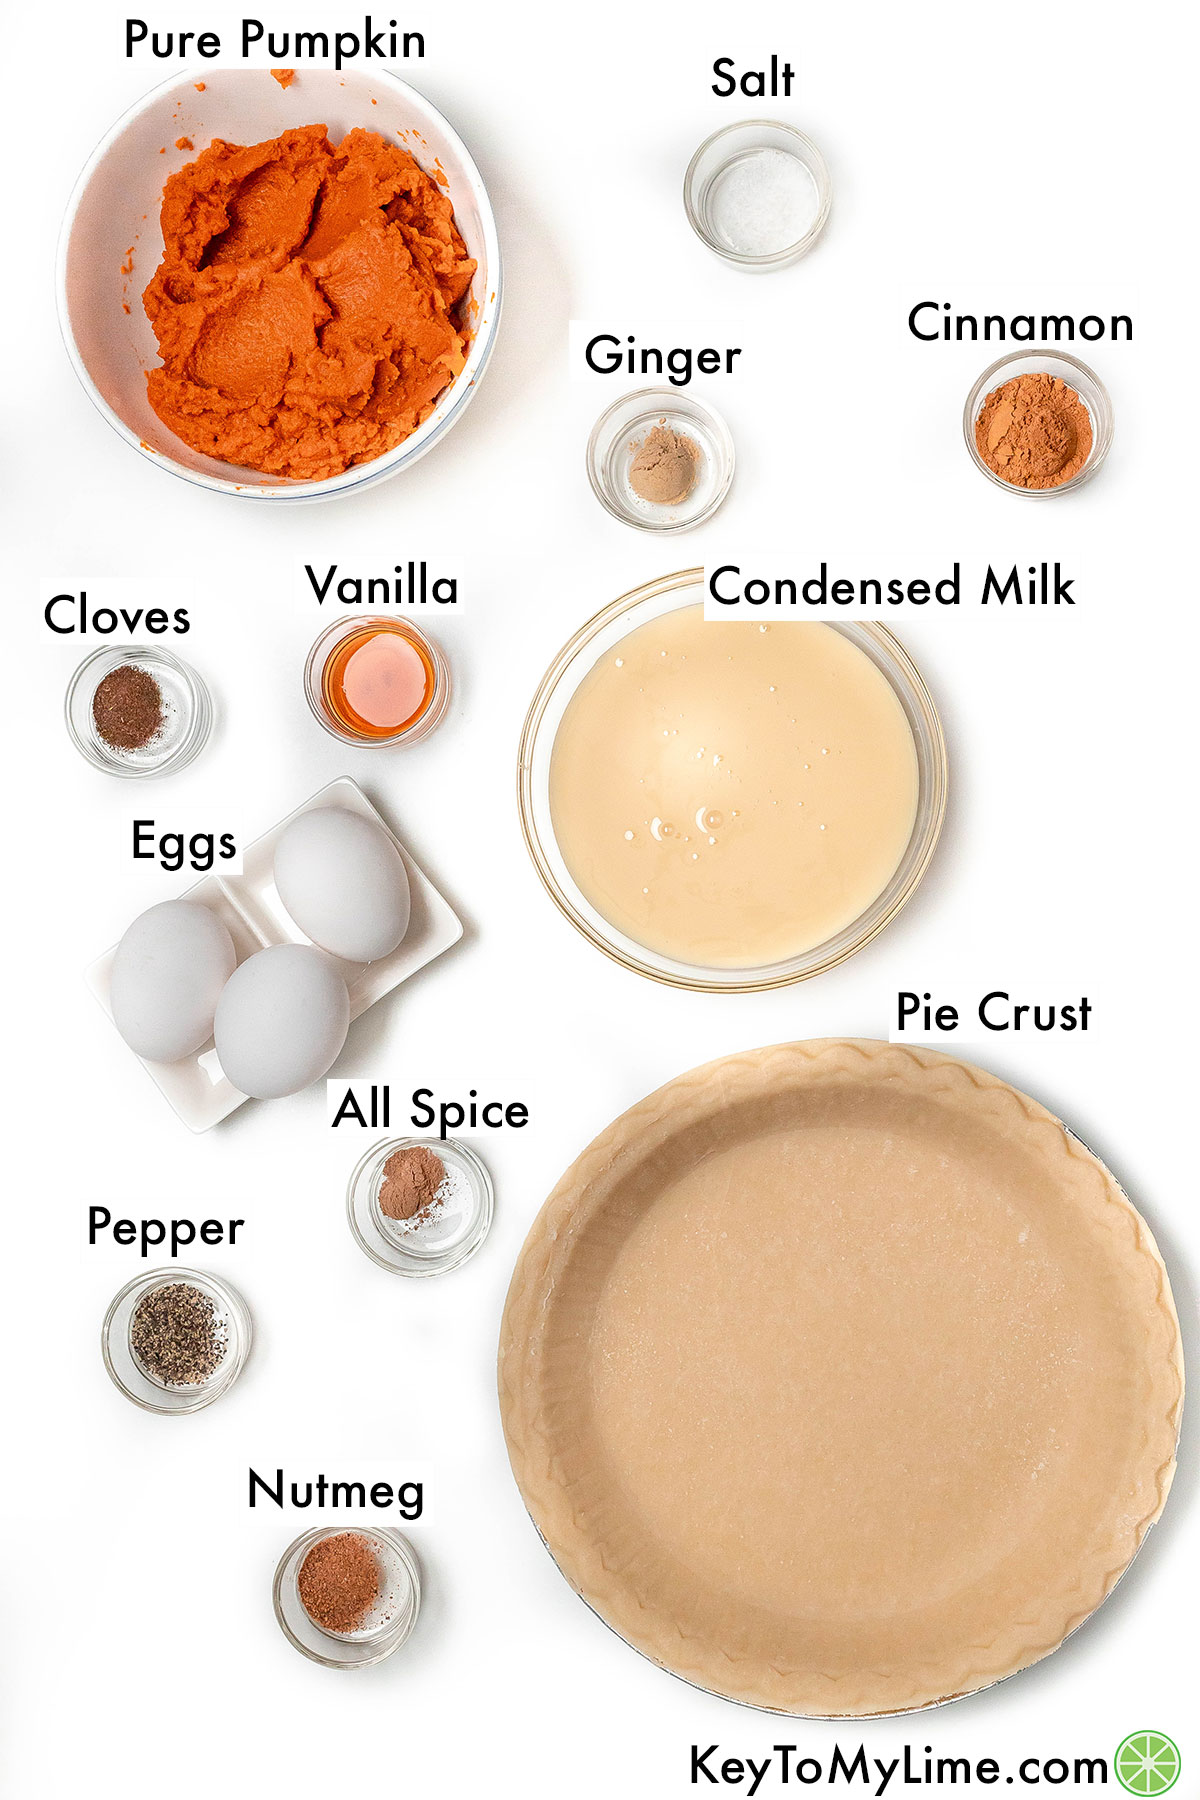 The labeled ingredients for pumpkin pie with sweetened condensed milk.